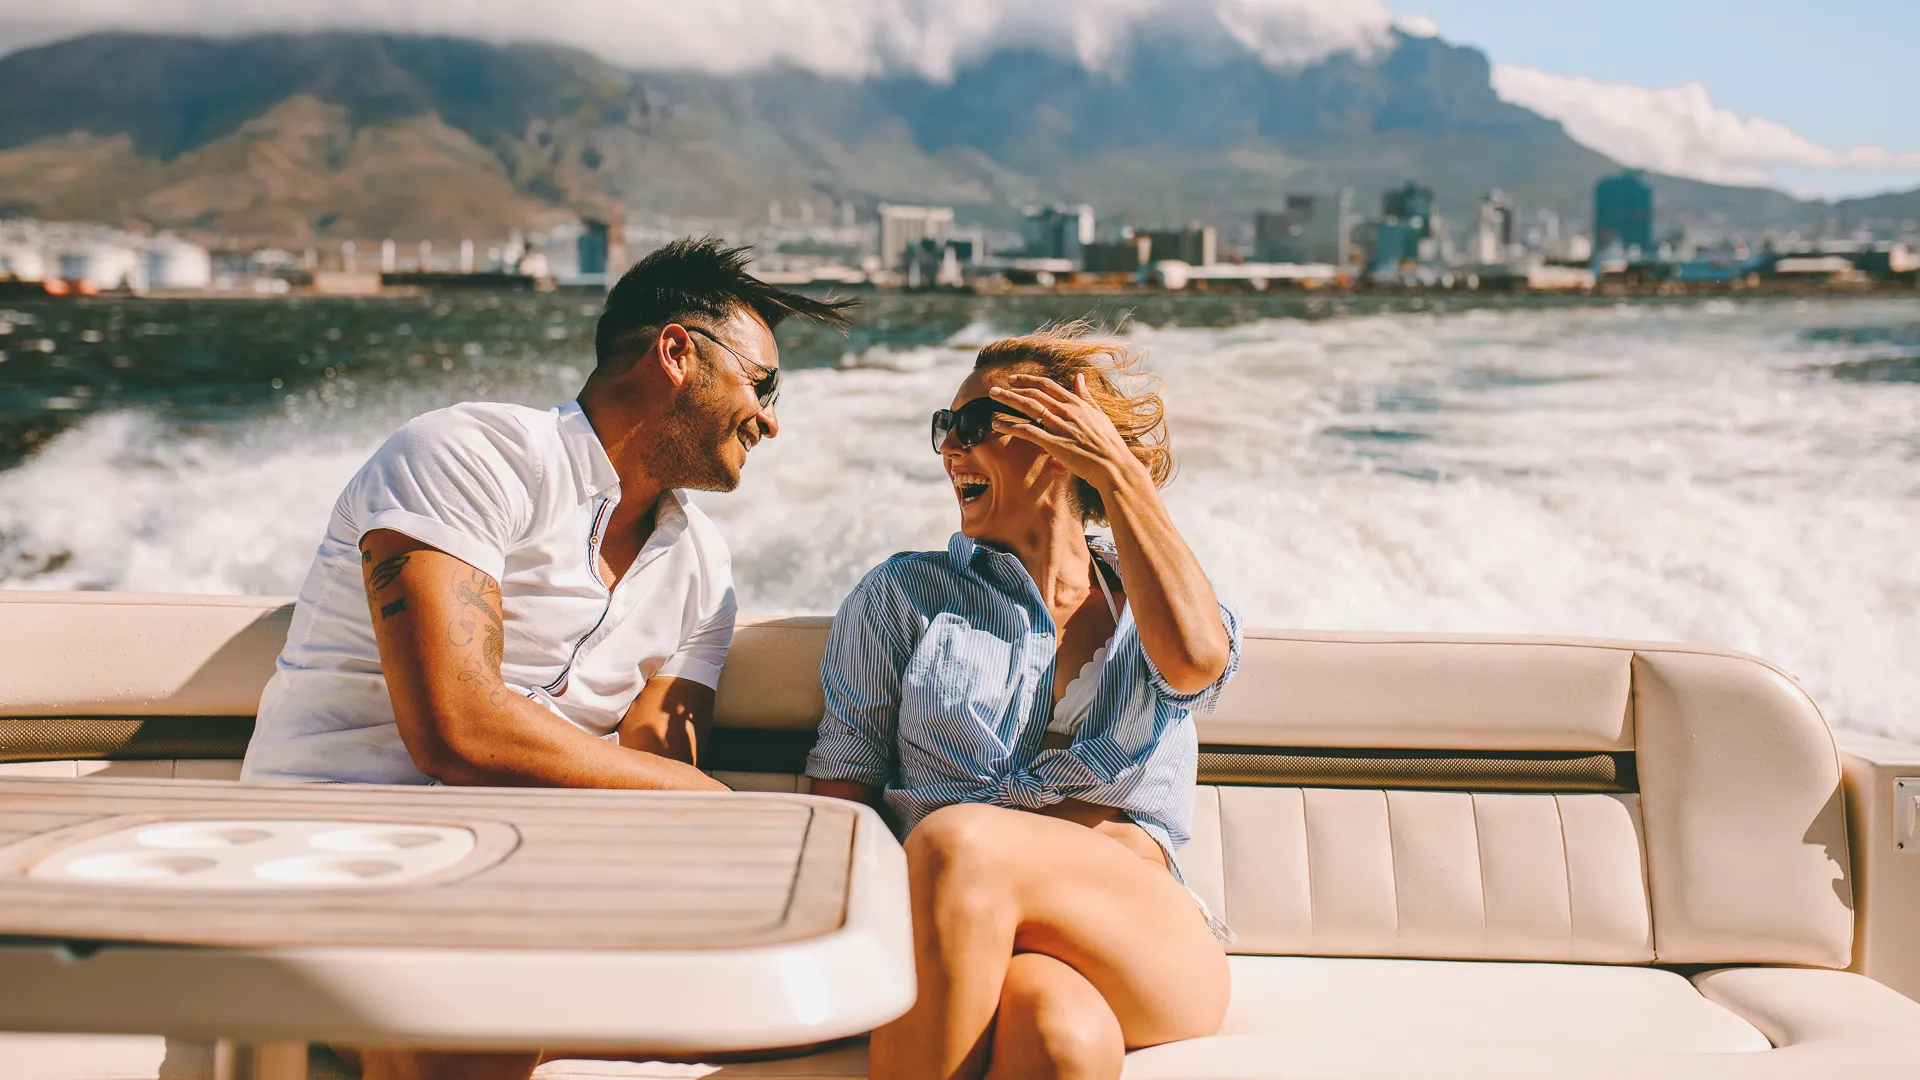 Cheerful young couple sitting on a boat.